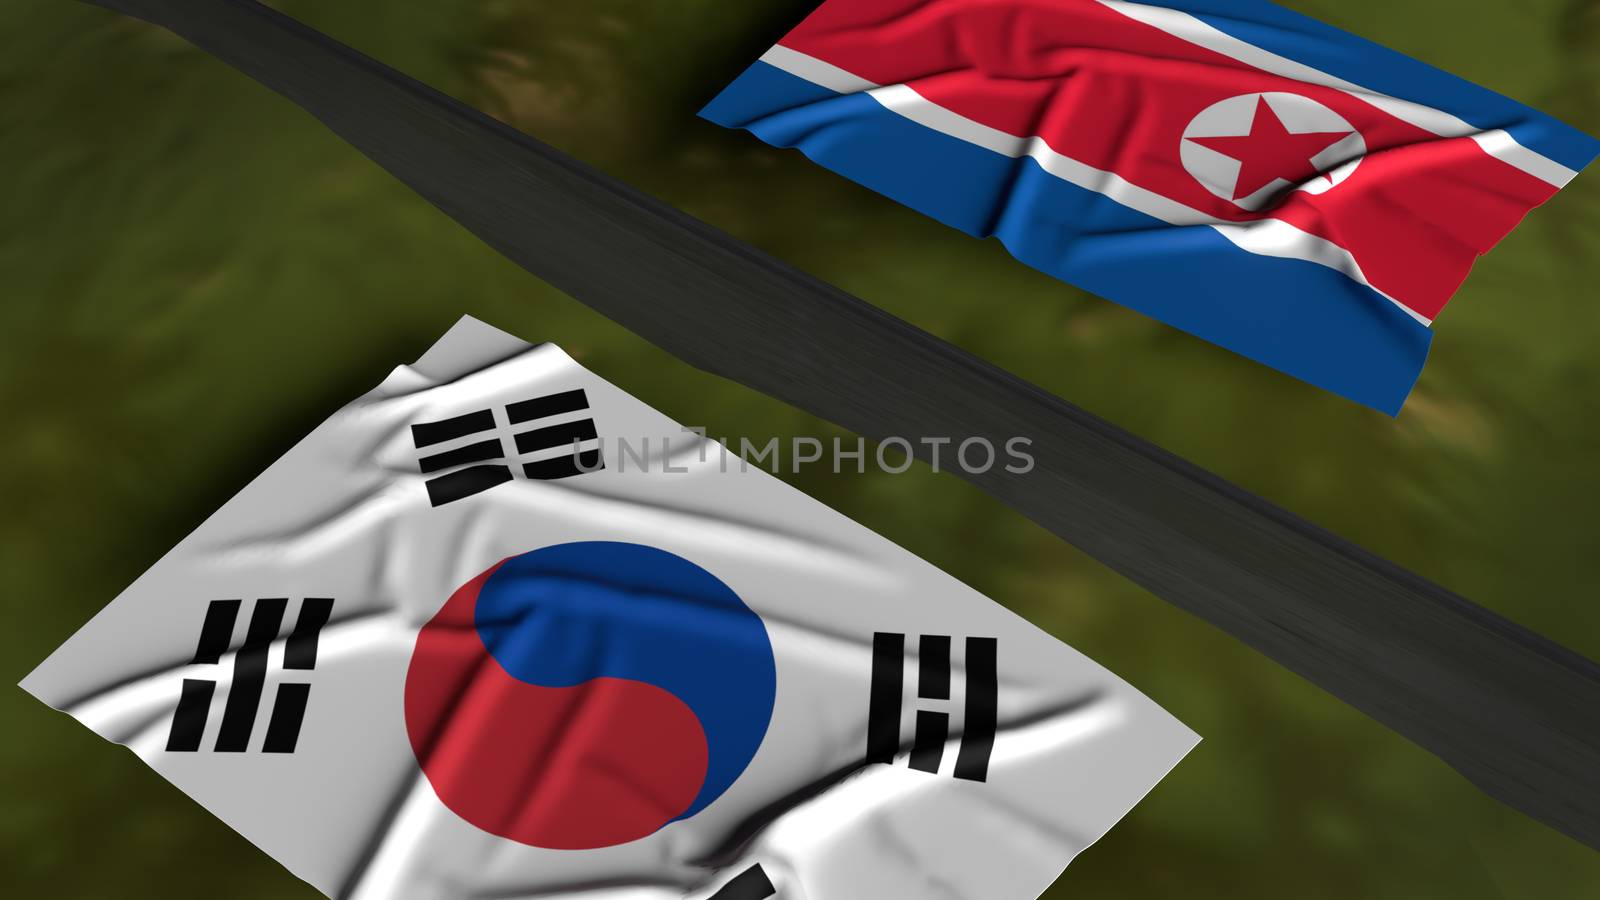 The north Korea and south Korea flags on map 3d rendering for  border content.

